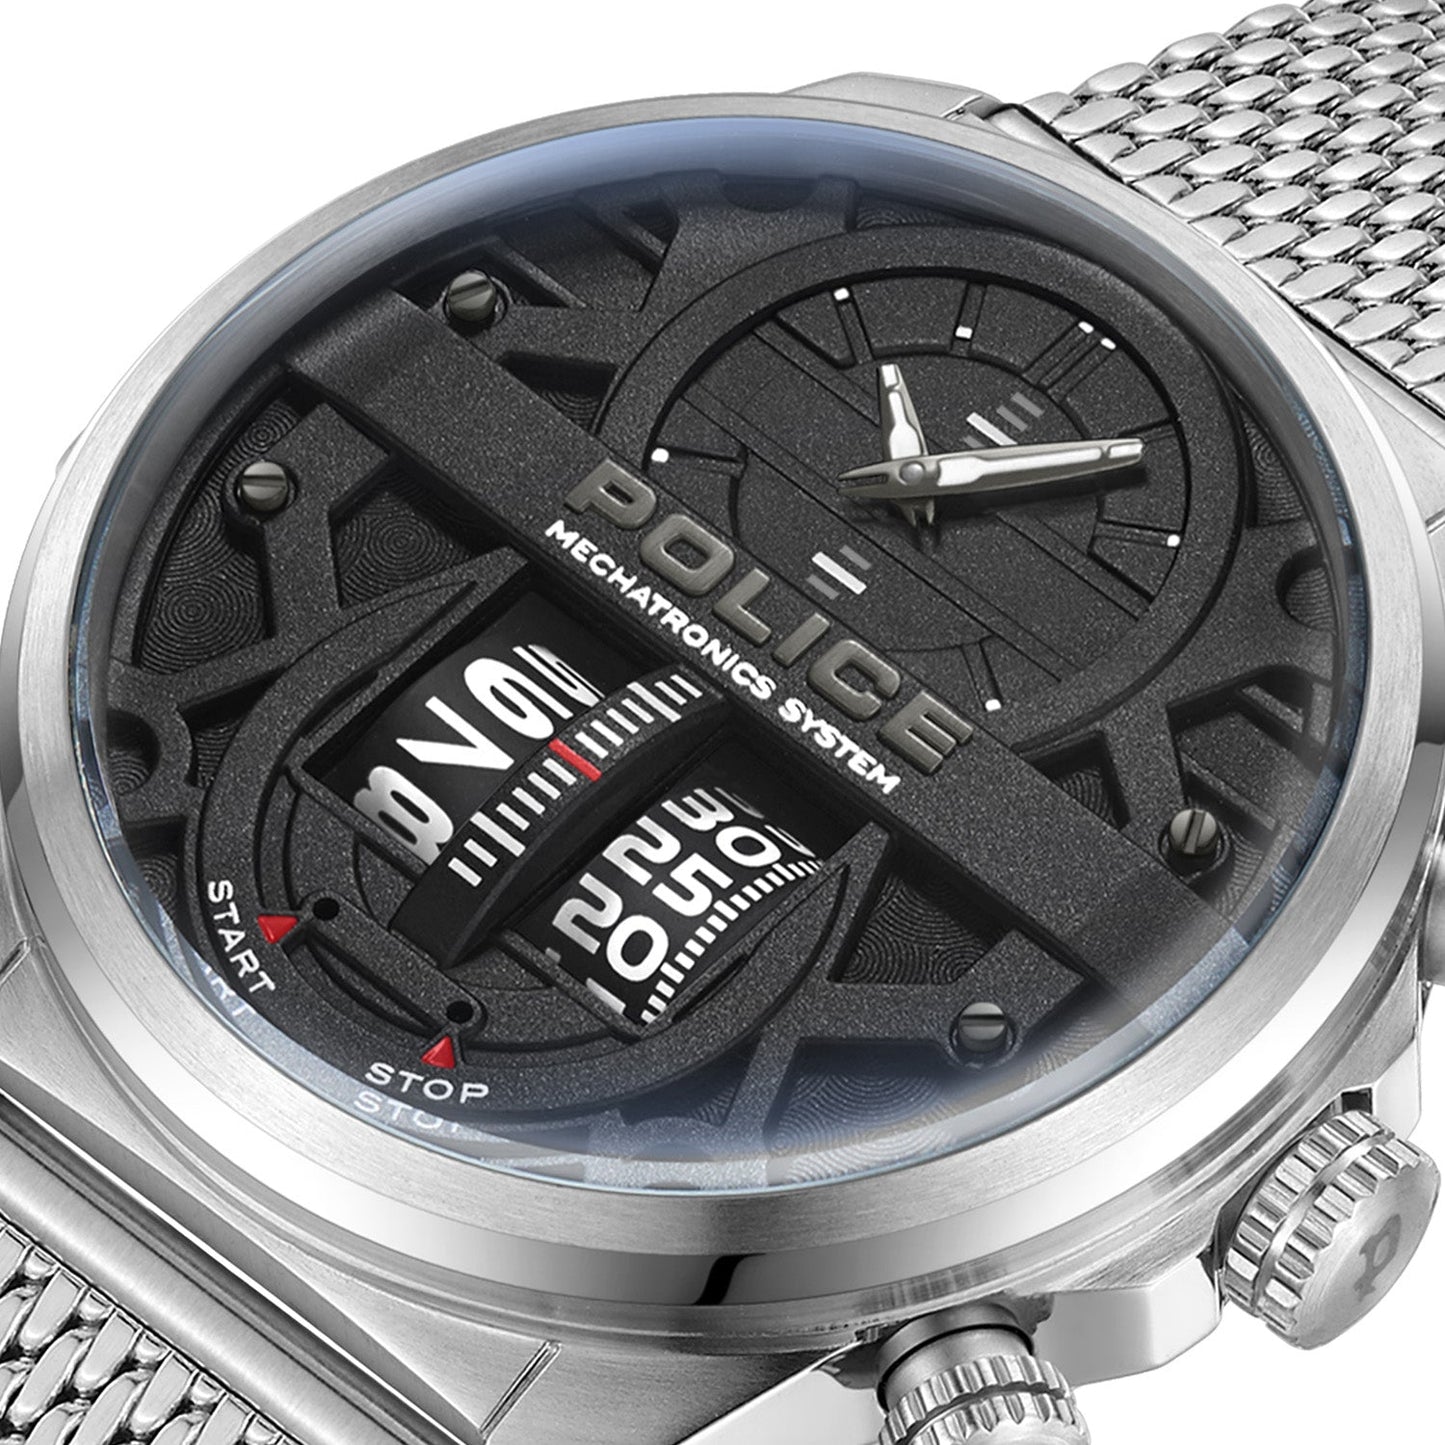 Police Rotorcrom Men's Watch